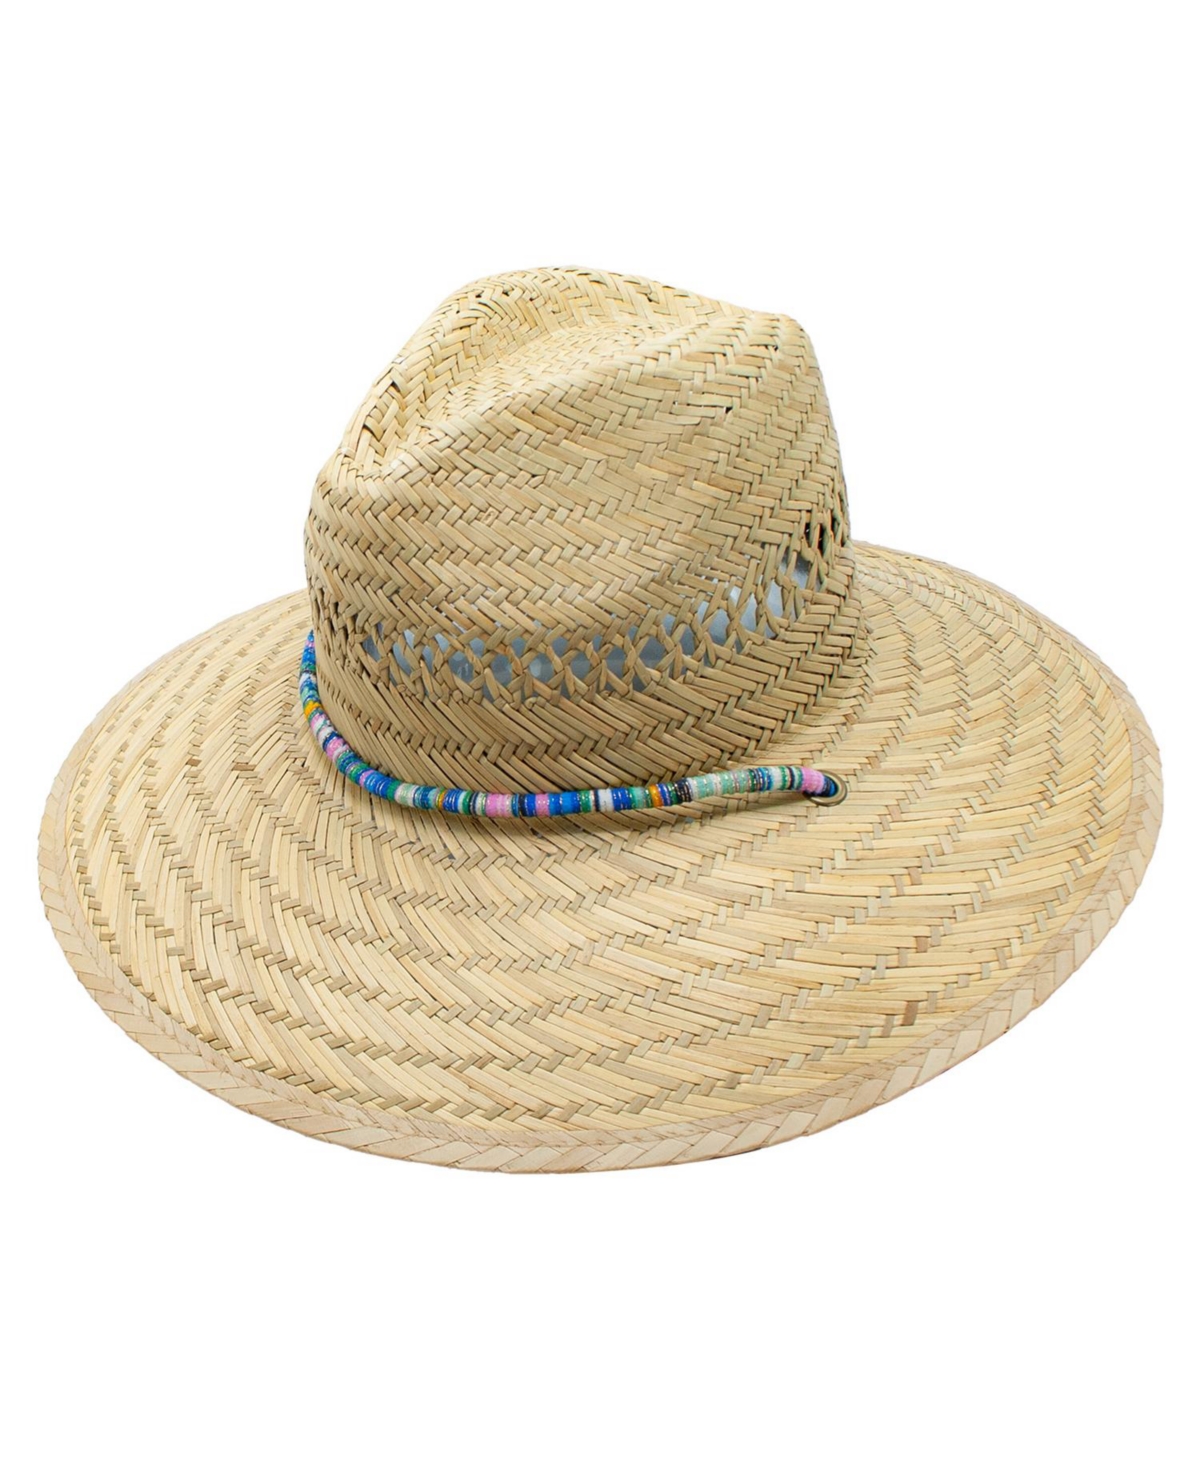 Delta Beaded Chin Cord Lifeguard Hat - Teal